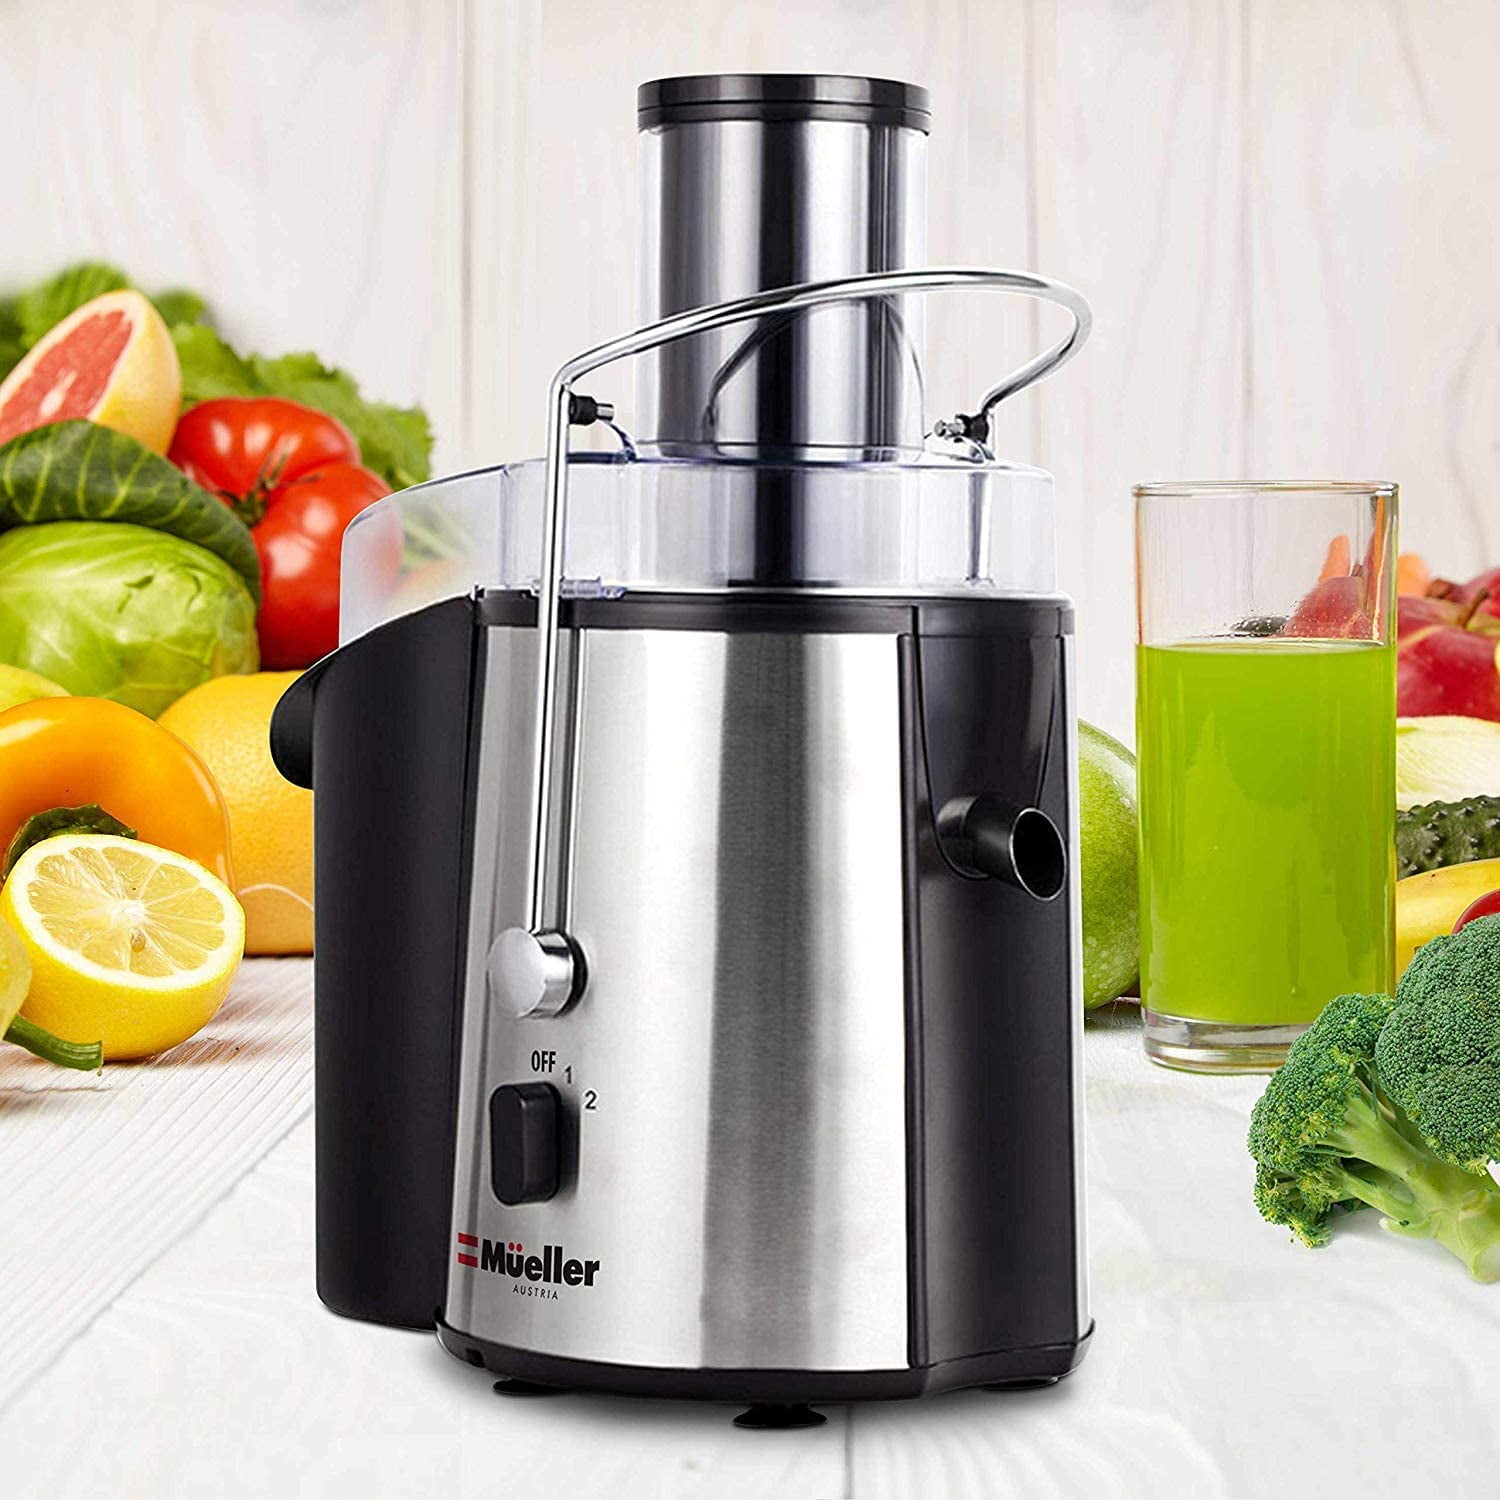 Mueller juice max pro cold press masticating fruit and vegetables juicer  60RPM with 3” chut jug like new open box never used all accessories inc for  Sale in Las Vegas, NV - OfferUp